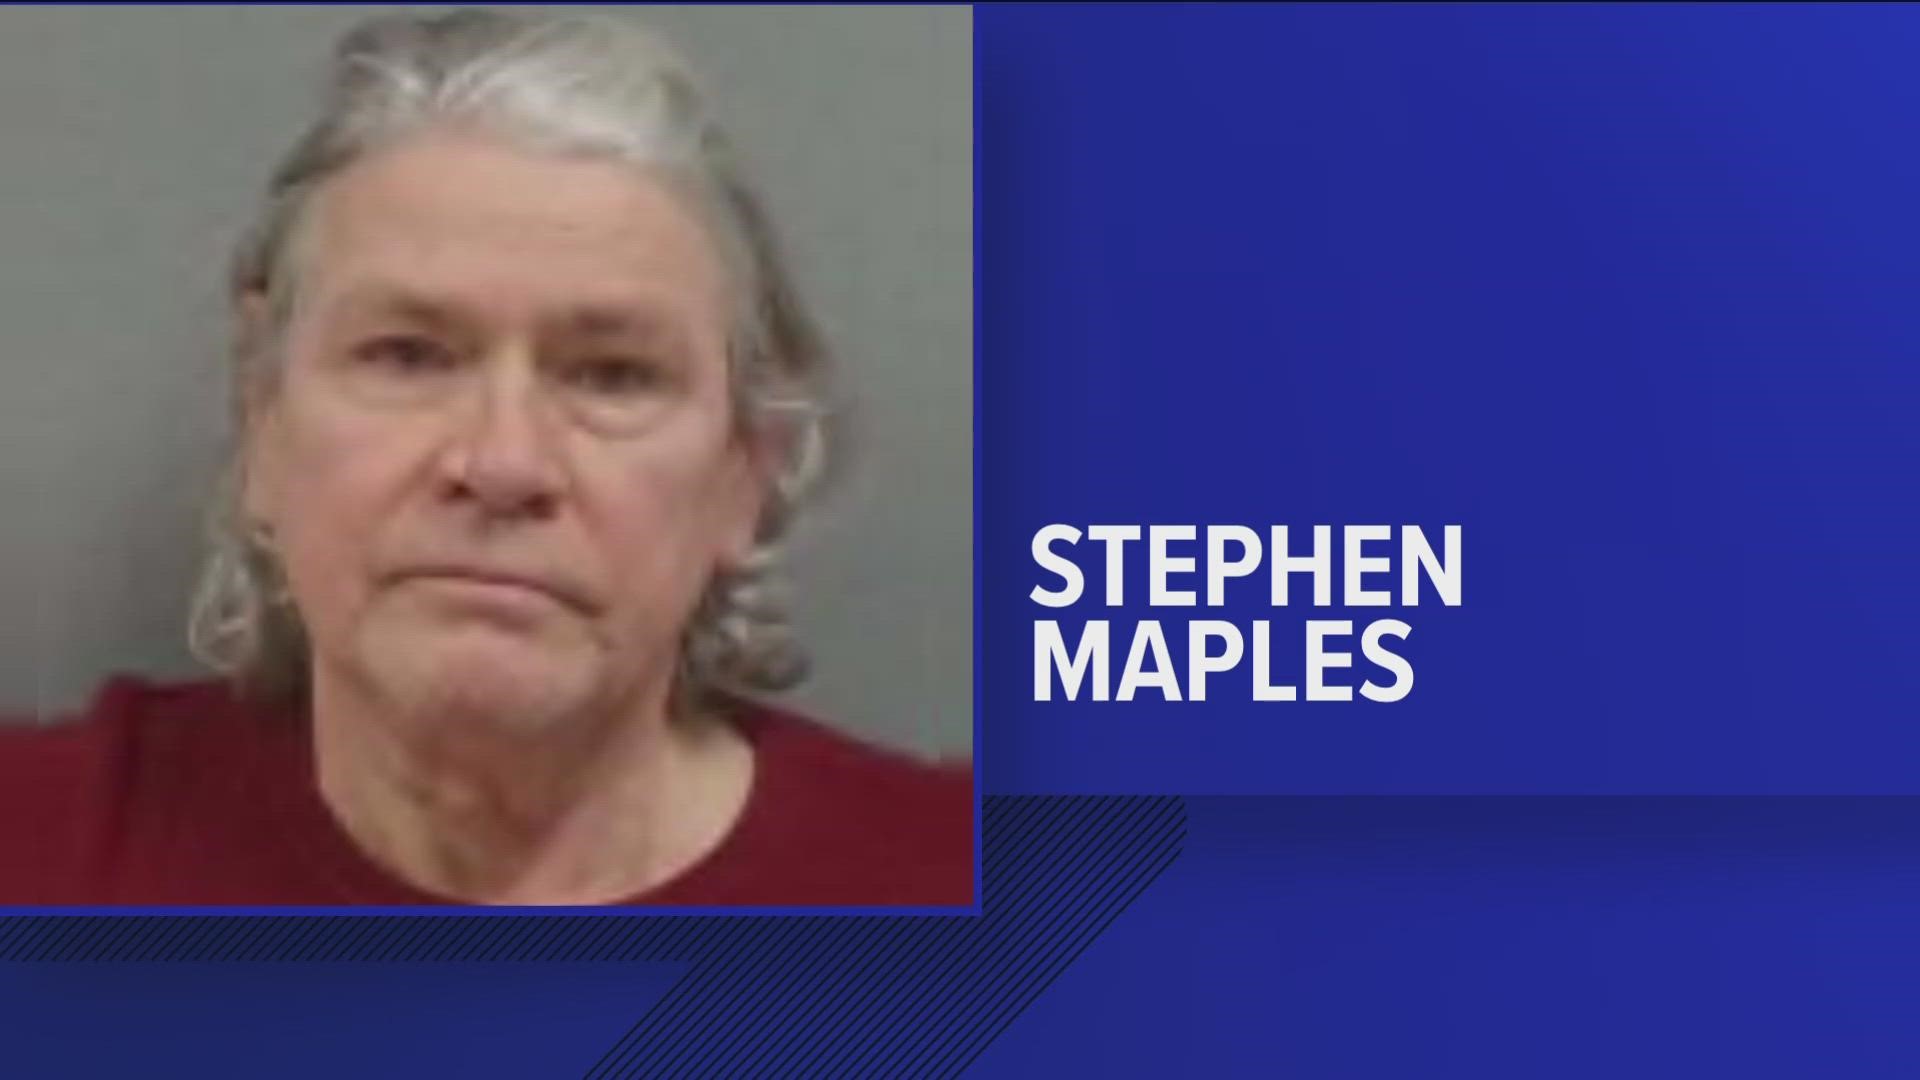 Steven Maples, 72, is accused of shooting Cathy Ann Maples. He has been arraigned on murder charges in Lenawee County.